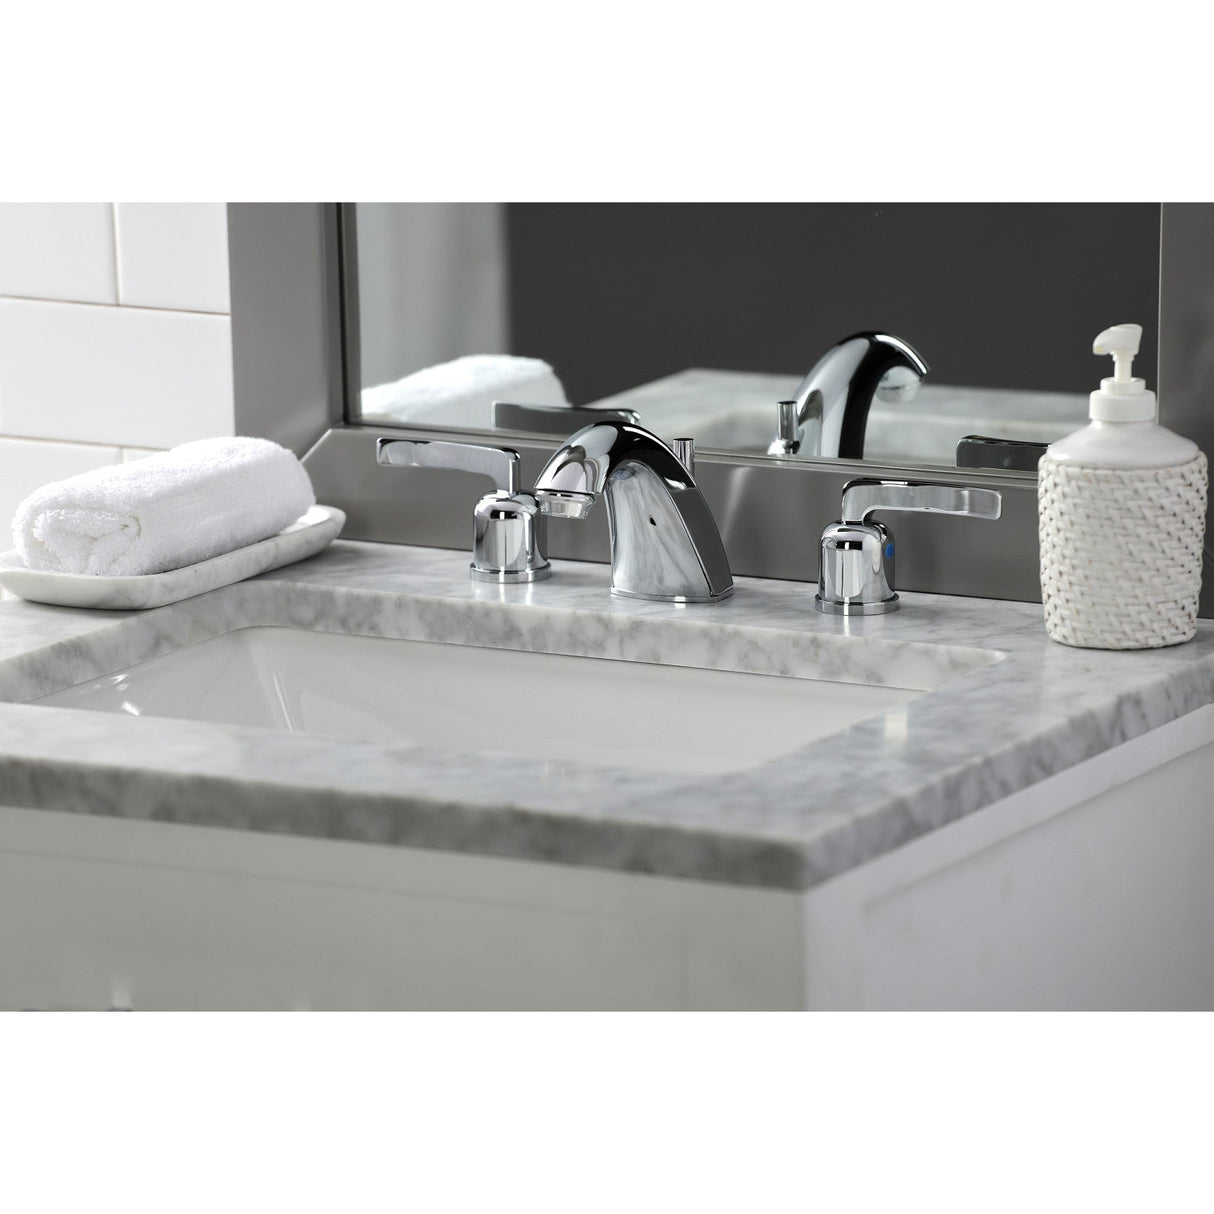 Centurion FB8951EFL Two-Handle 3-Hole Deck Mount Widespread Bathroom Faucet with Plastic Pop-Up, Polished Chrome